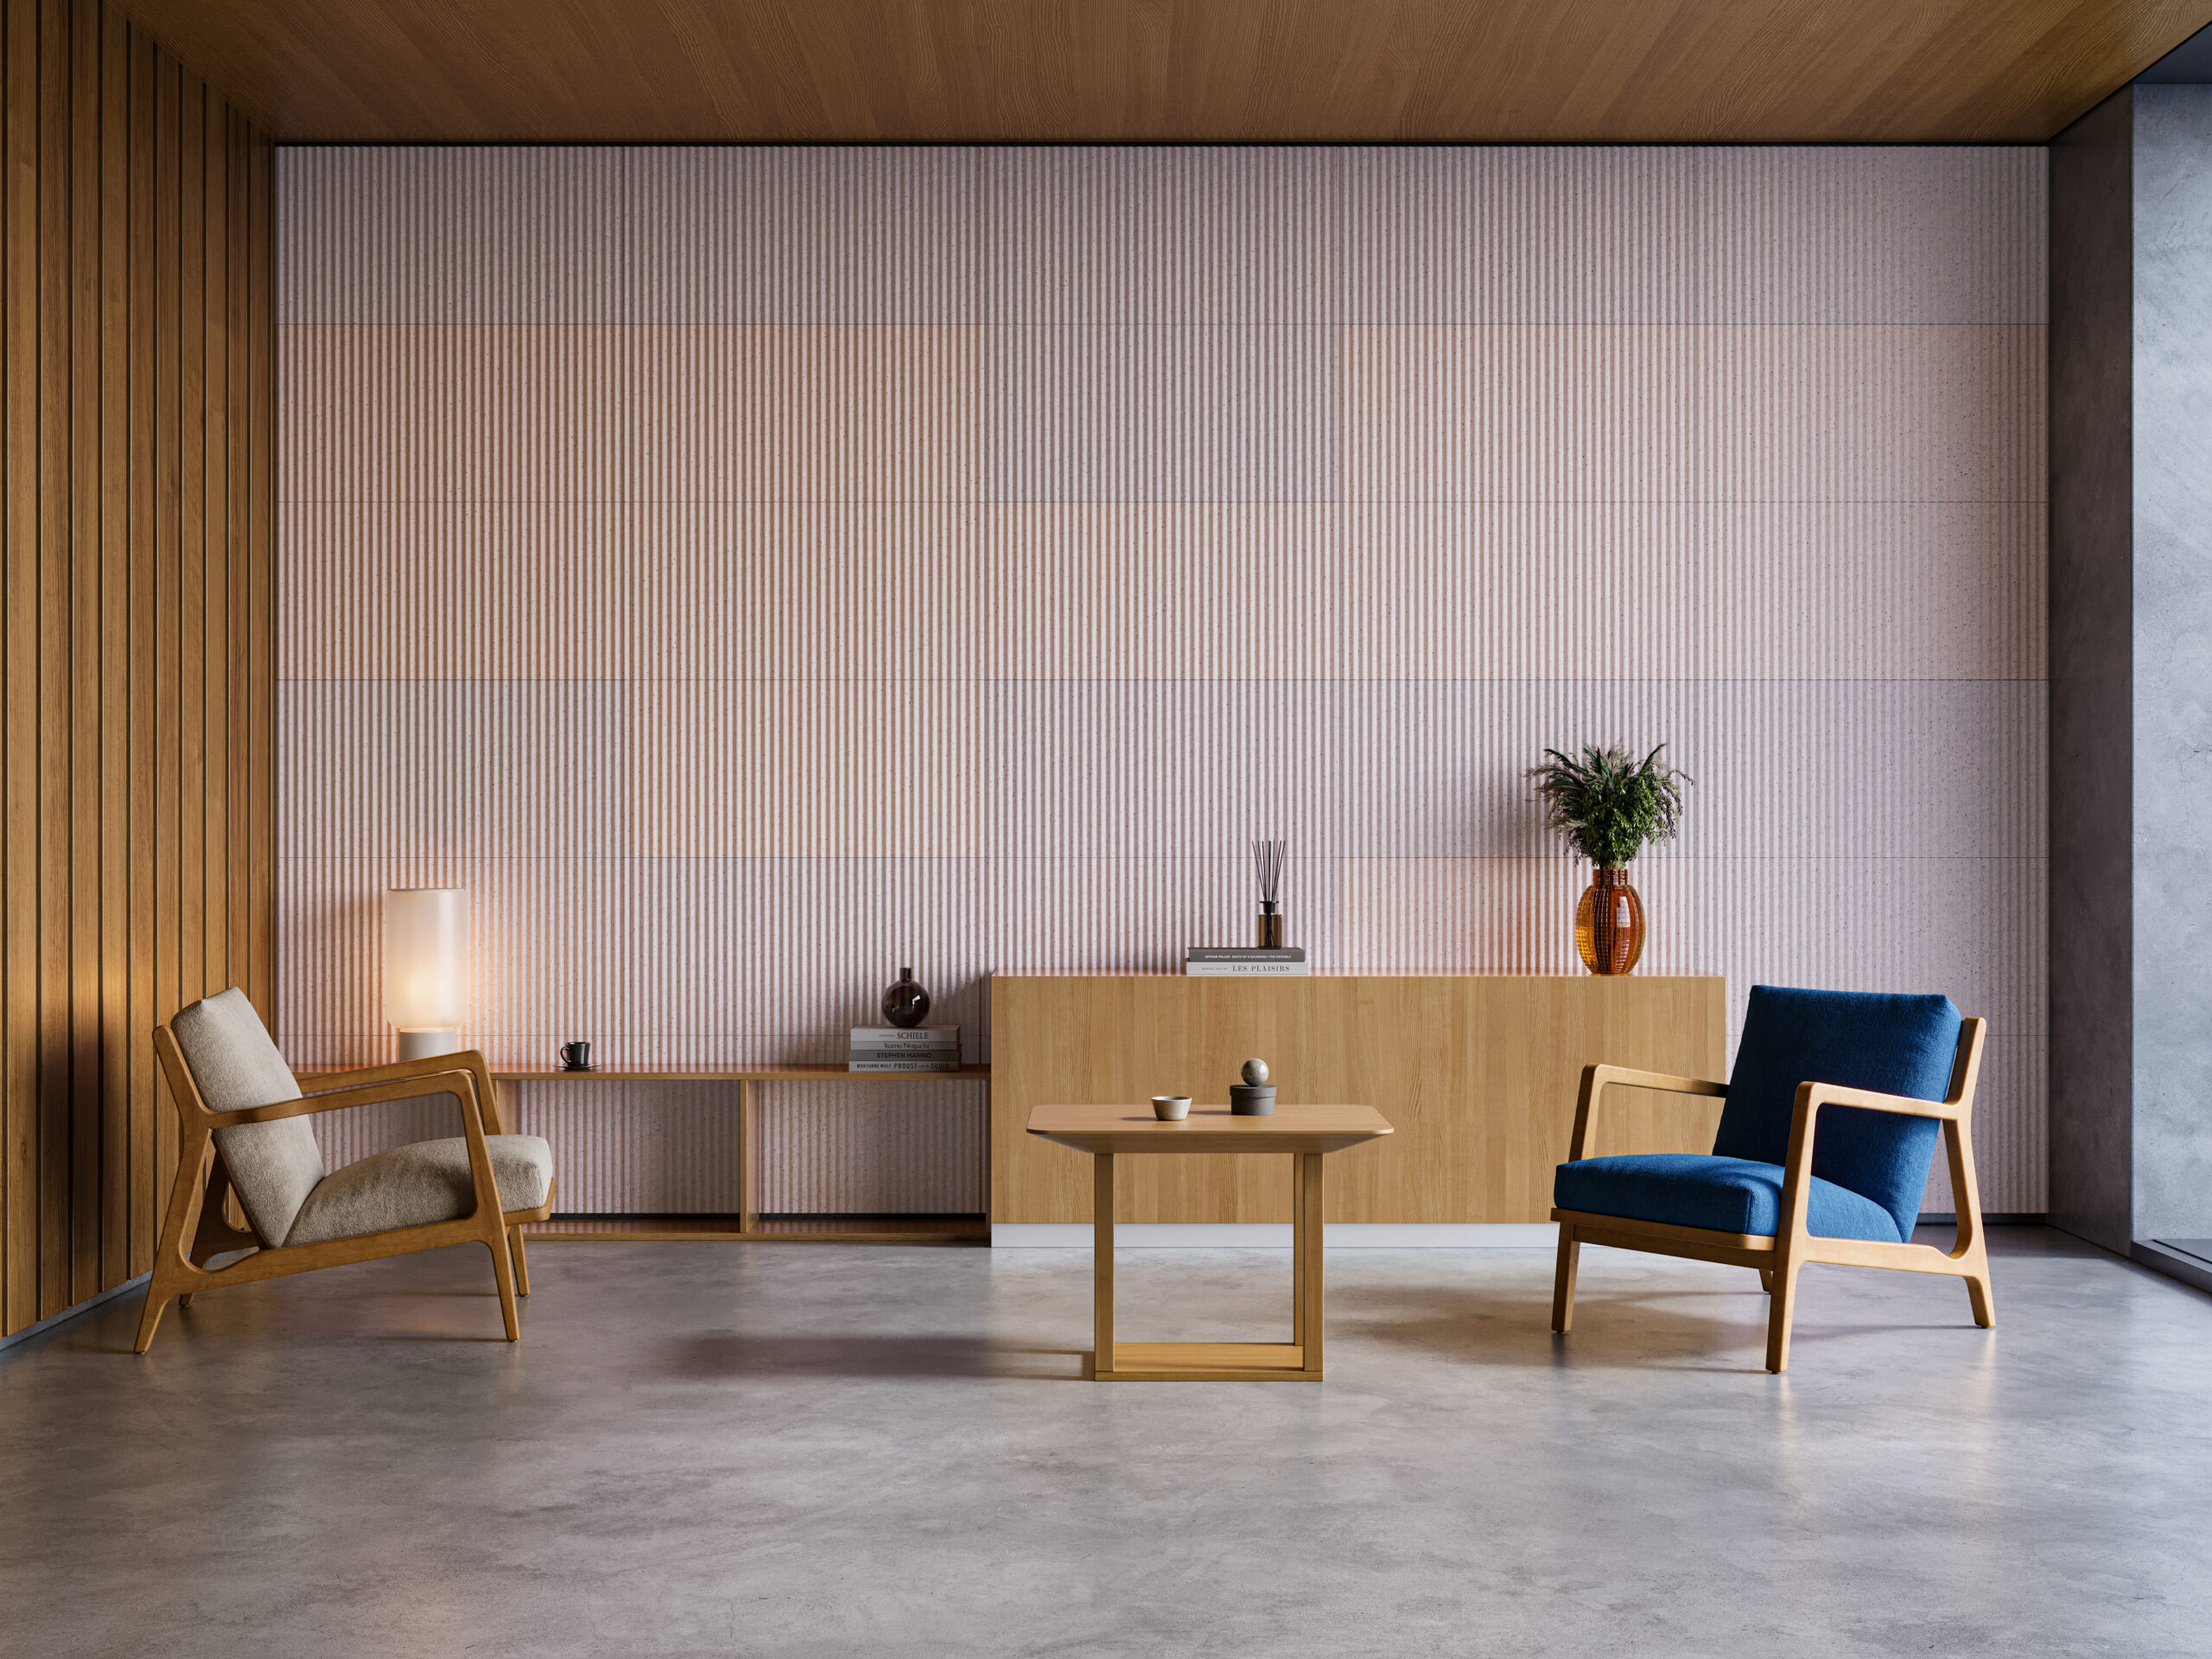 BAUX expands its offering with a new range of colours for its bio-based acoustic panel collection